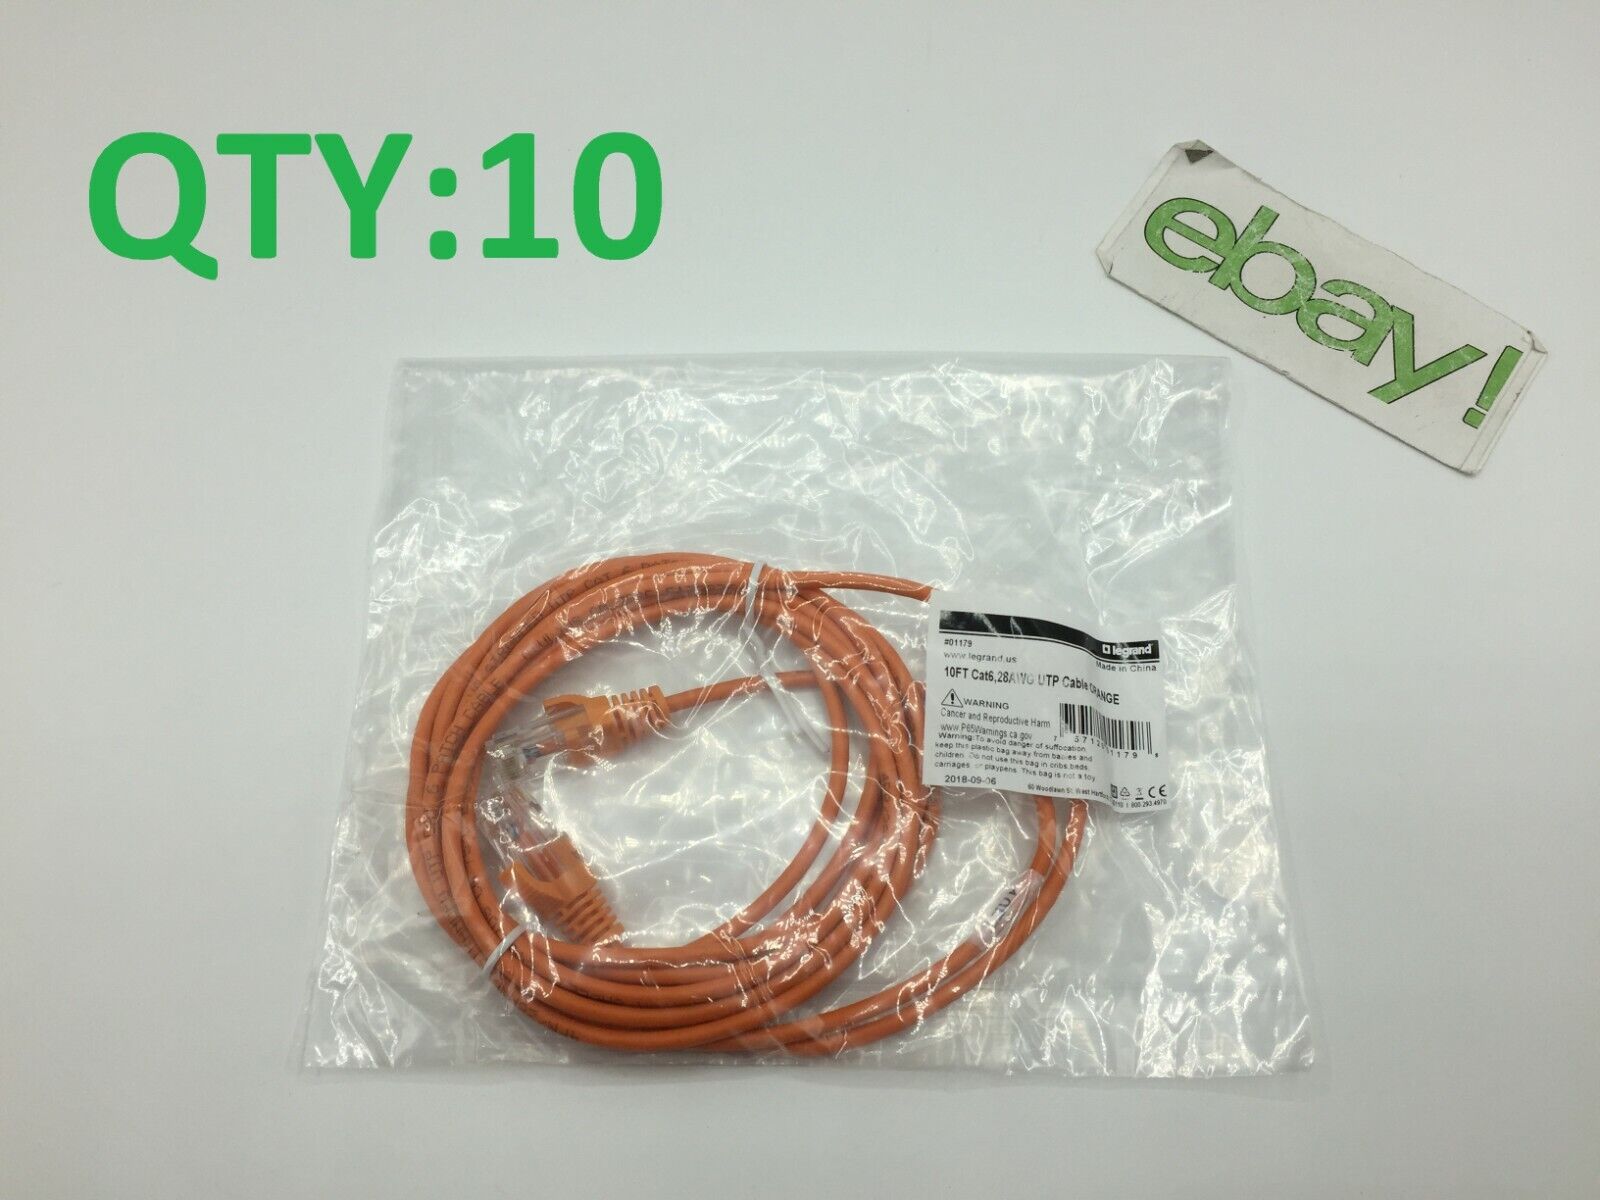 LOT of 10 LEGRAND CAT6 10FT Long 28 AWG UTP Cables [ ORANGE ] FREE S/H